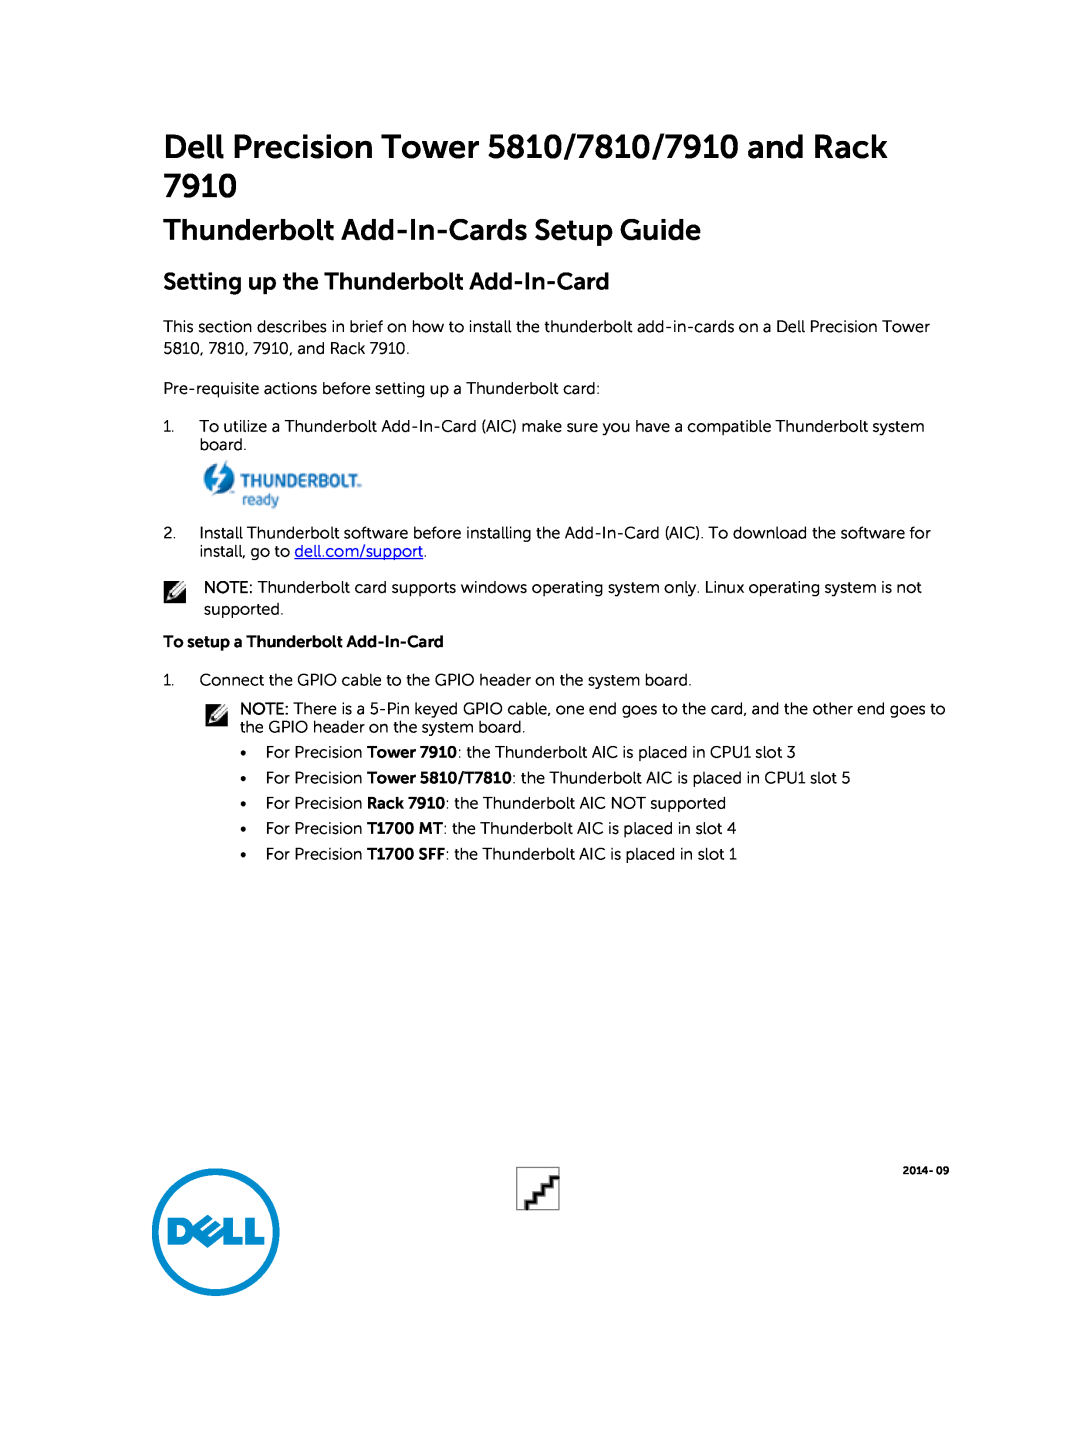 Dell setup guide Teradici PCoIP Card Host Dual/Quad Setup Guide, Dell Precision Tower 5810/7810/7910 and Rack 